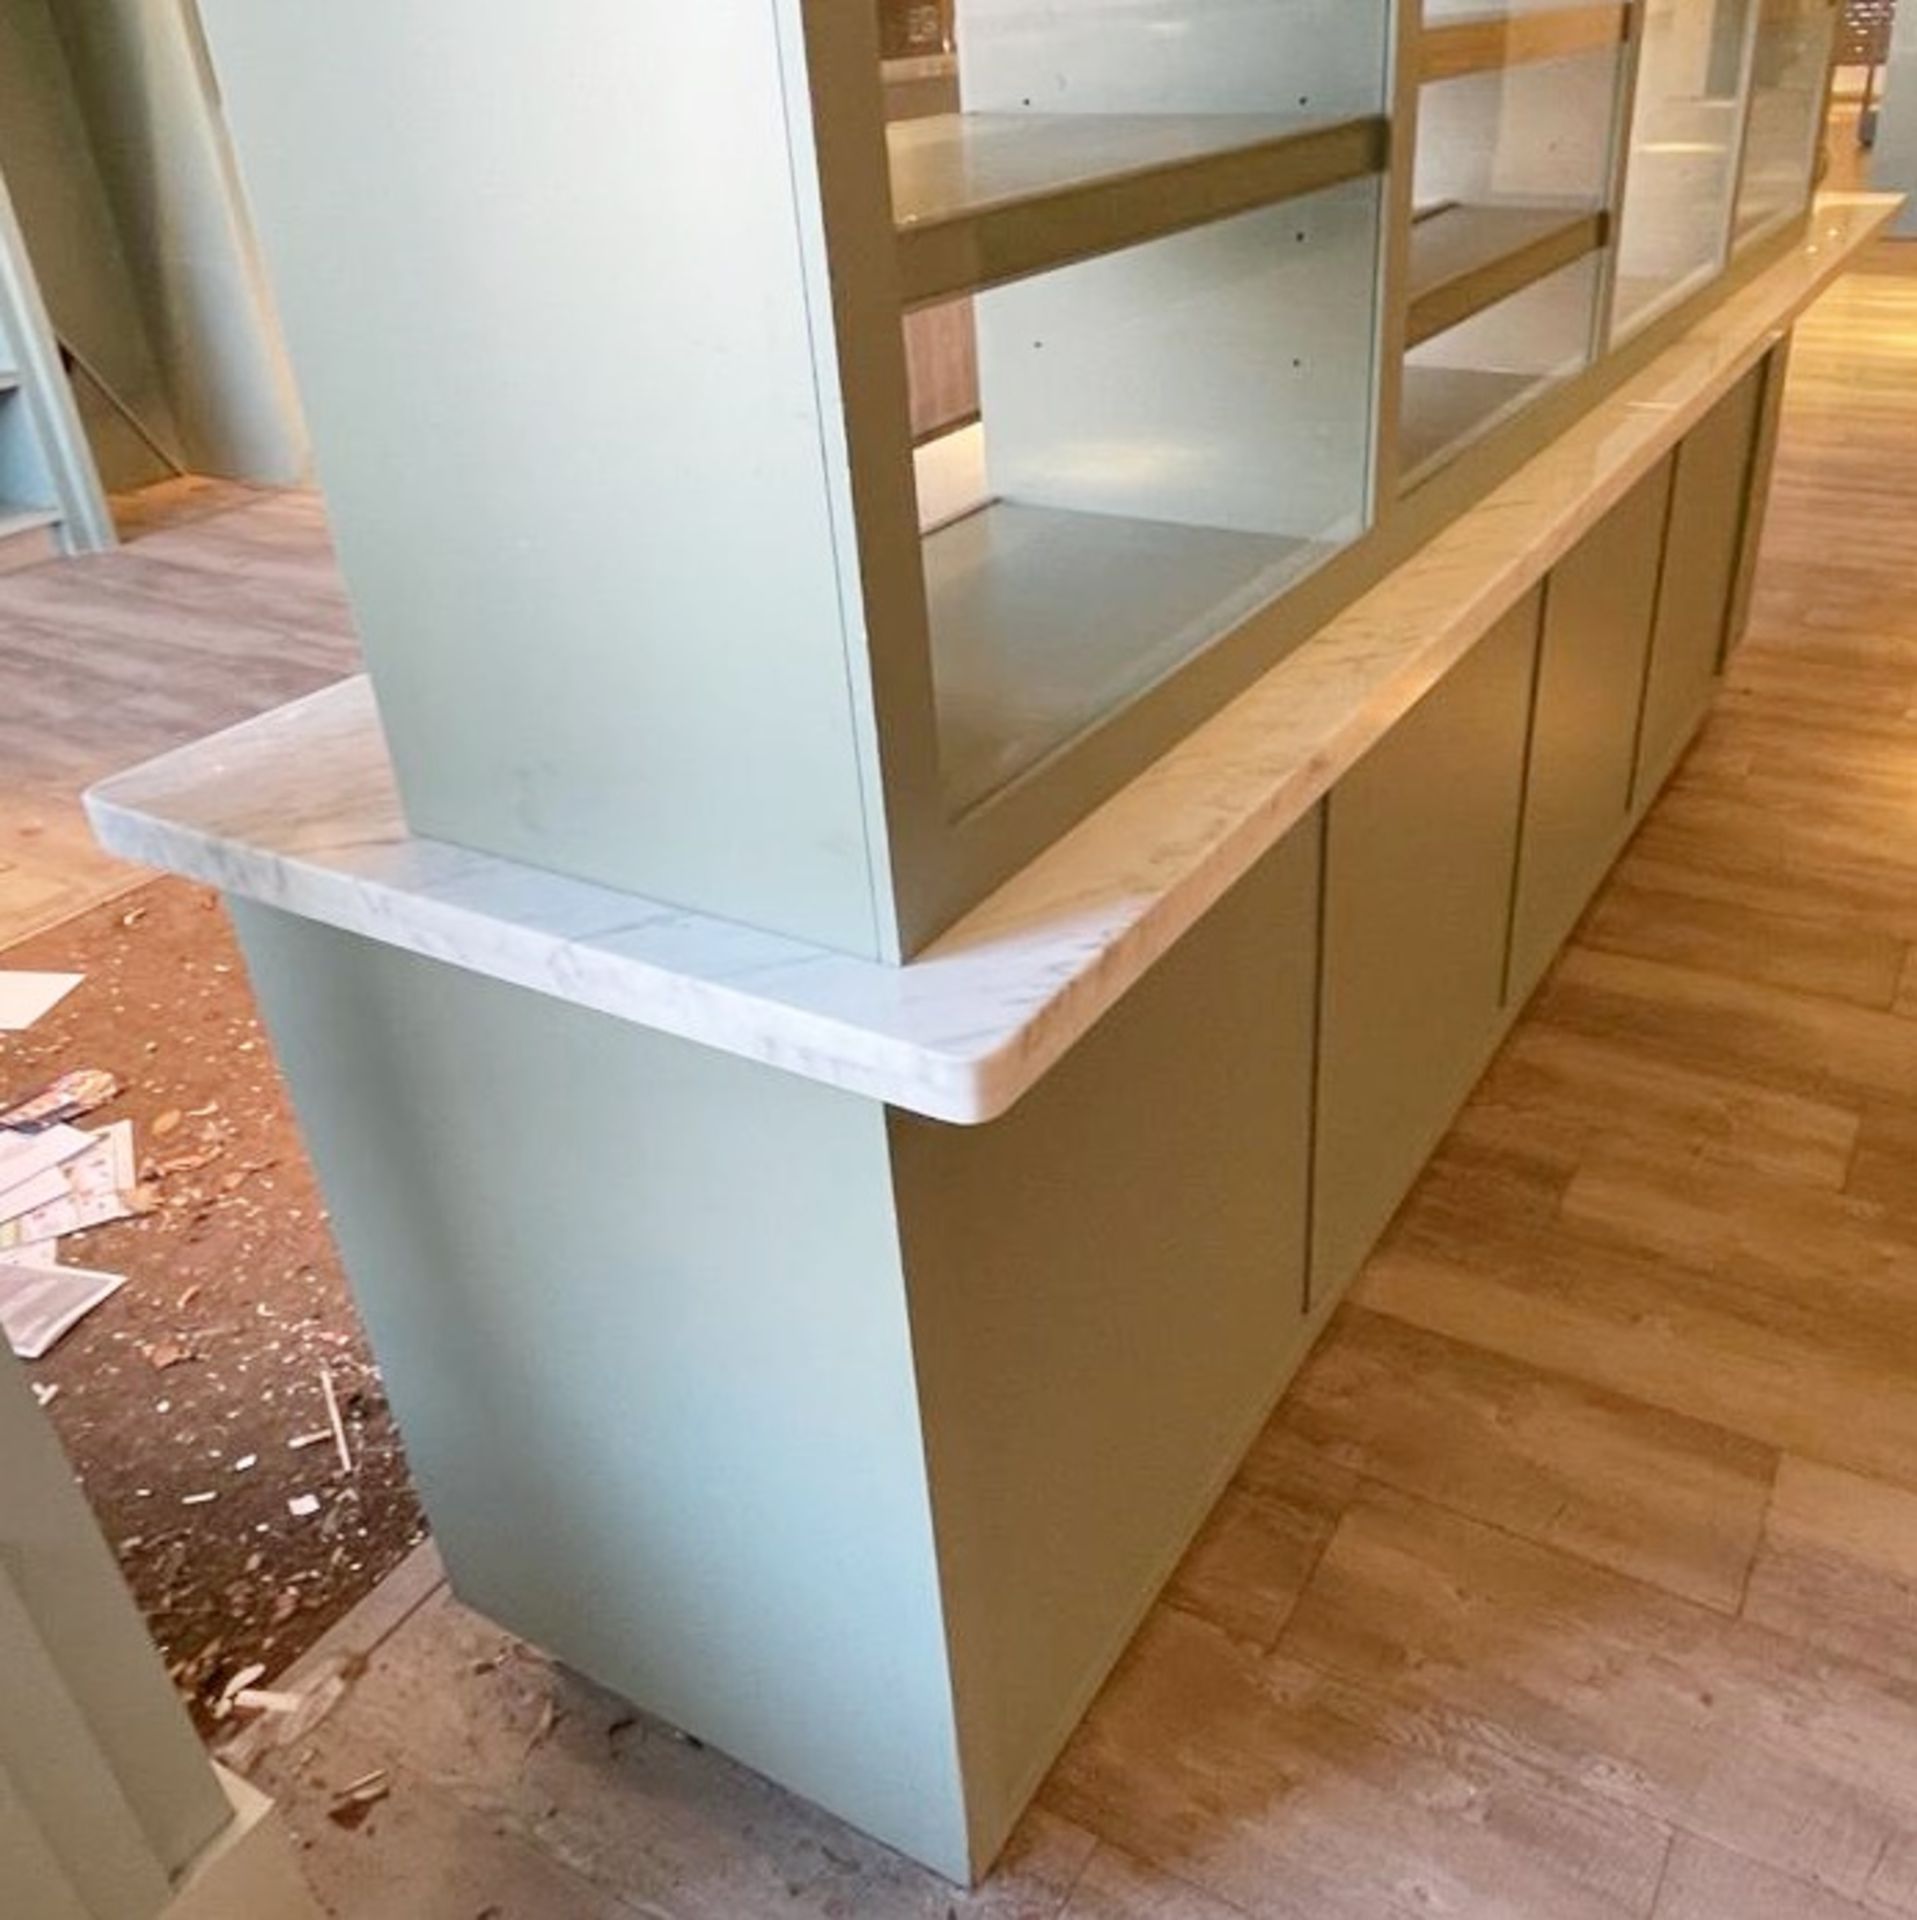 1 x Bespoke Display Island / Partition With Display Shelves, Olive Green Finish, Marble Worktop - Image 16 of 16